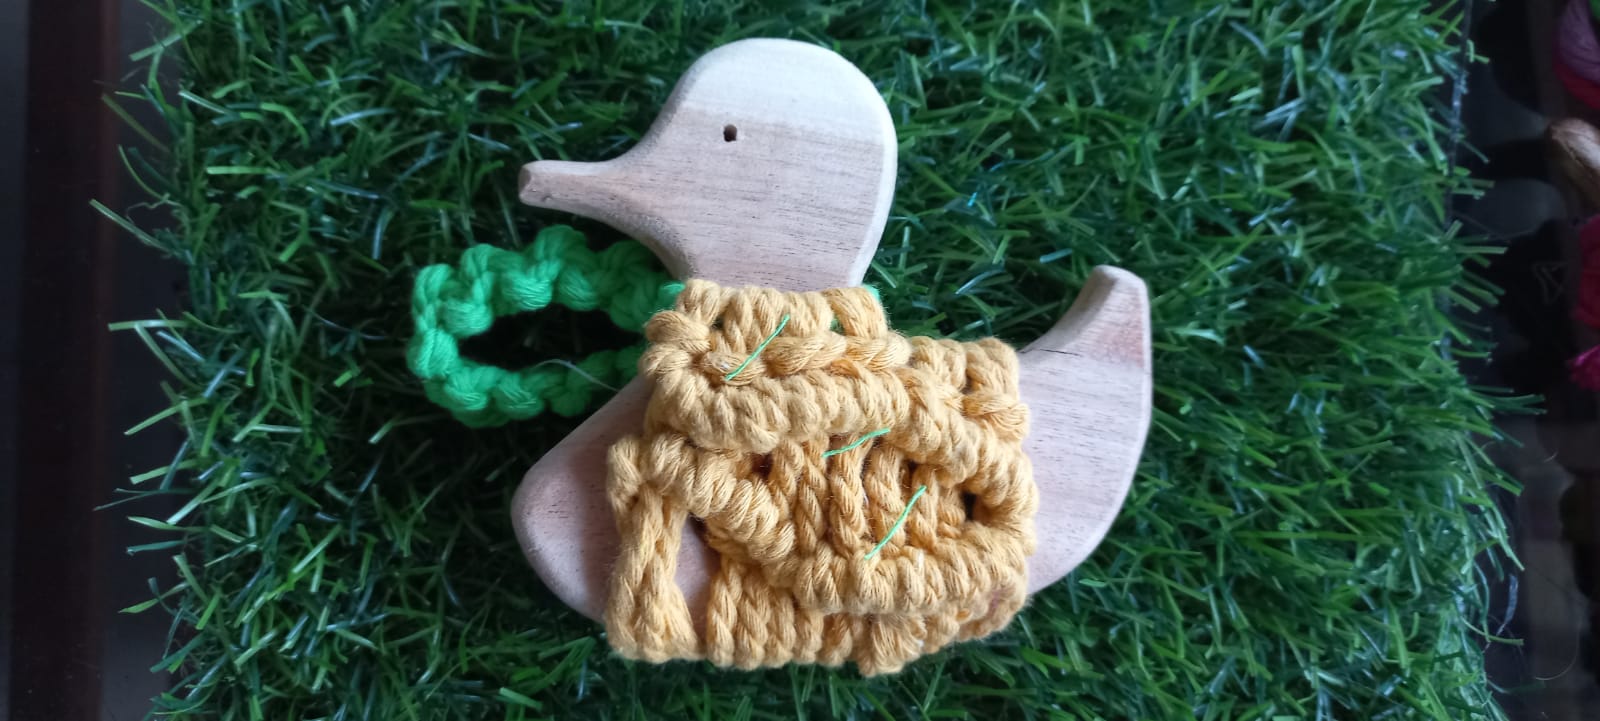 Soothe your teething baby naturally with our Neem Macrame Teethers, crafted from high-quality neem wood and soft macrame for safe and soothing relief.